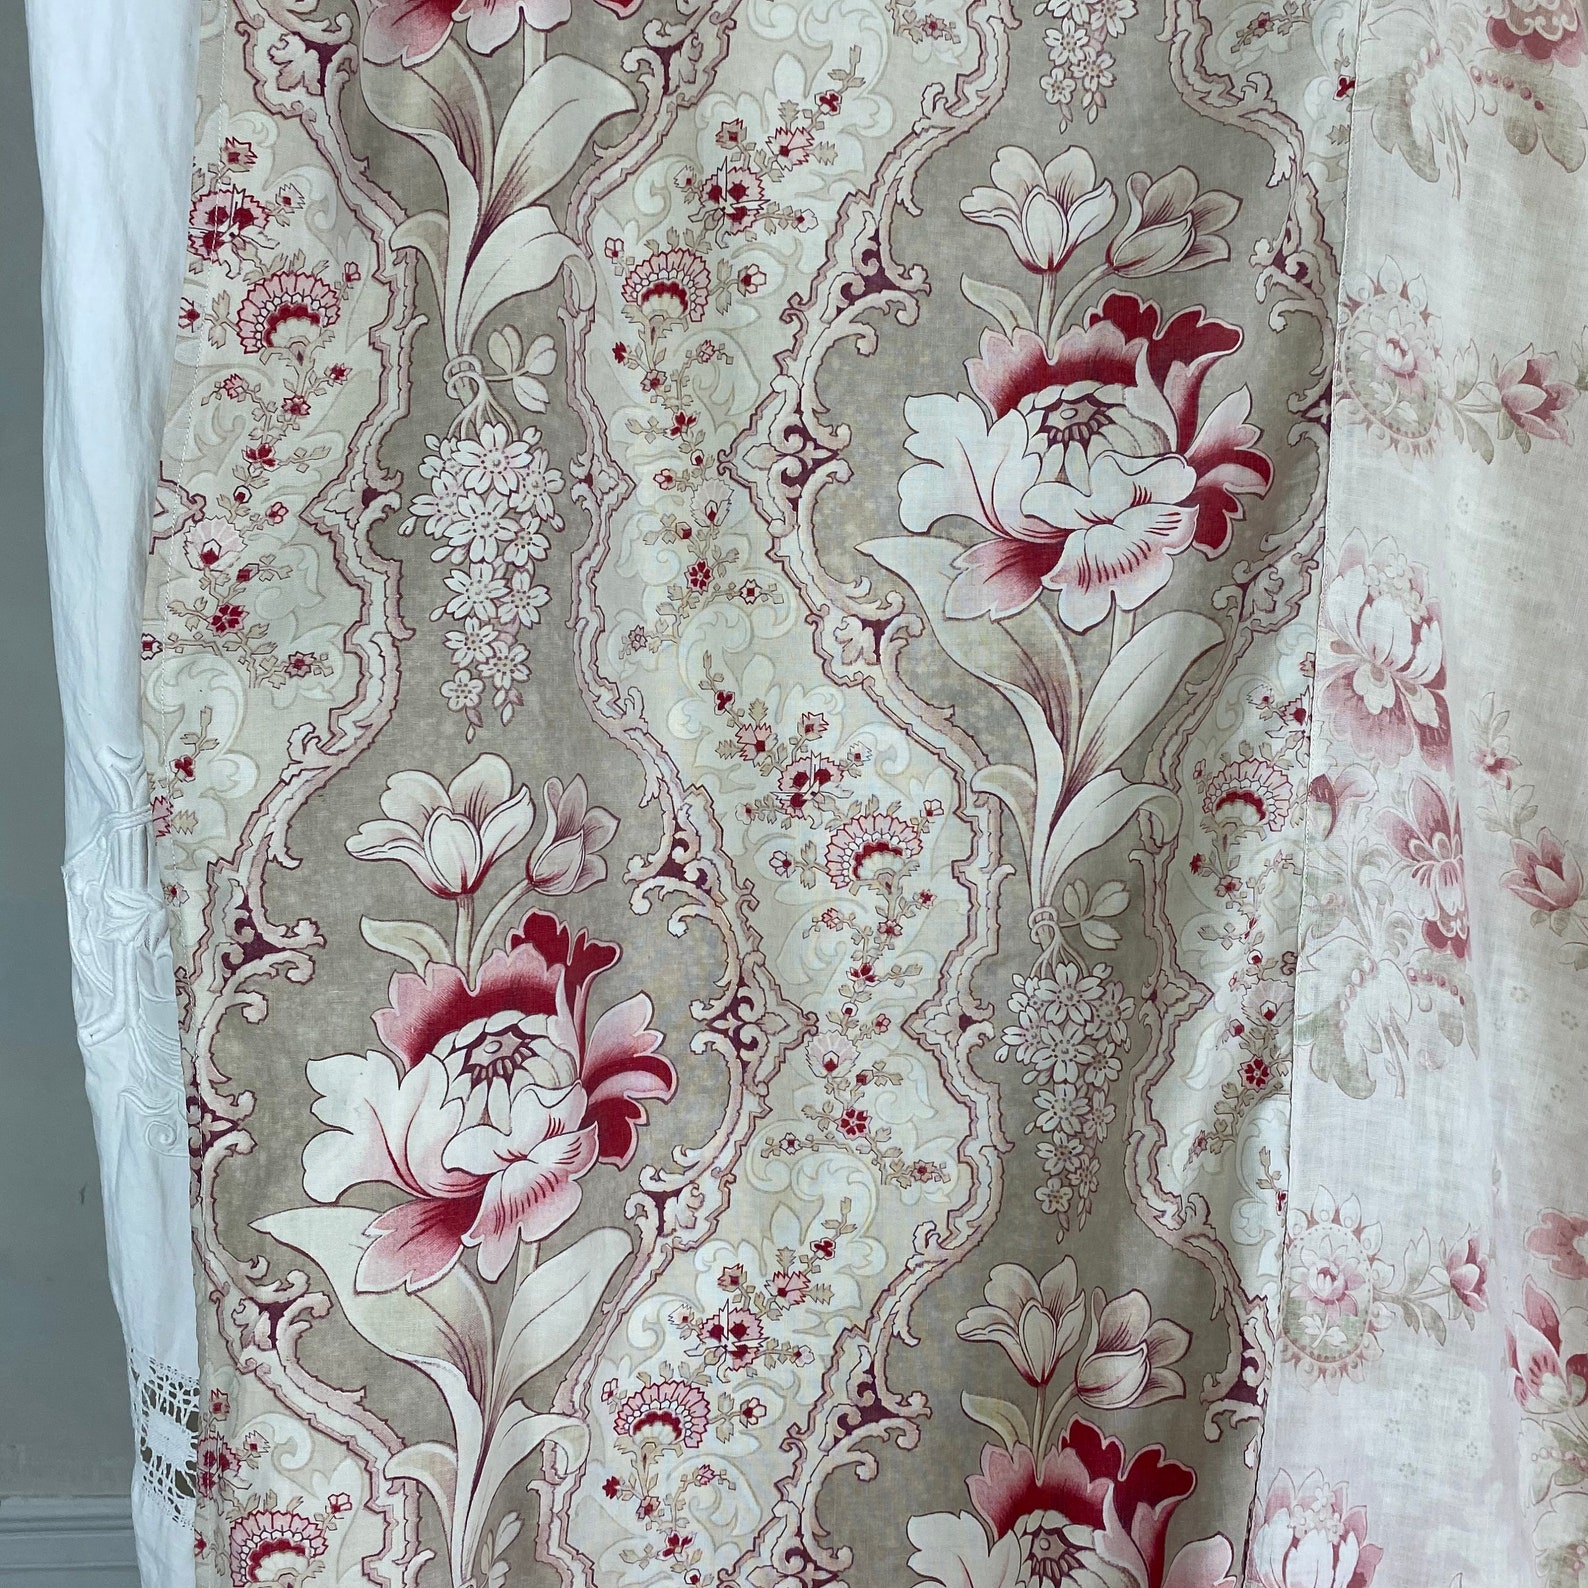 STUNNING TWO patterns Art Nouveau Faded Floral fabric ...